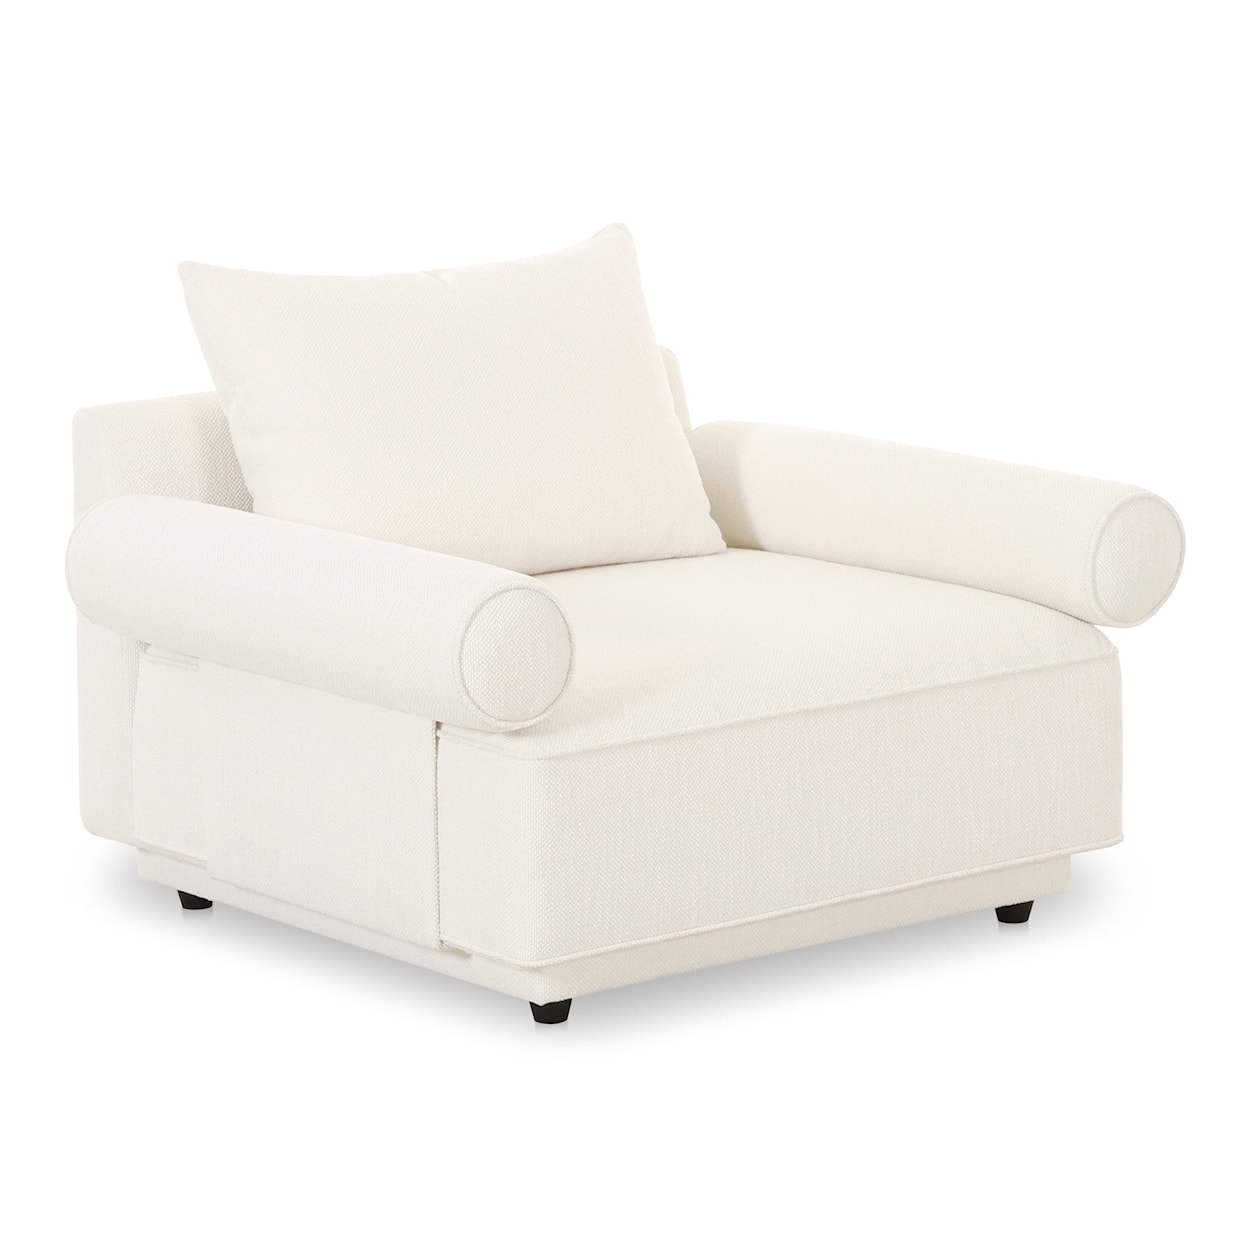 Moe's Home Collection Rosello Accent Chair